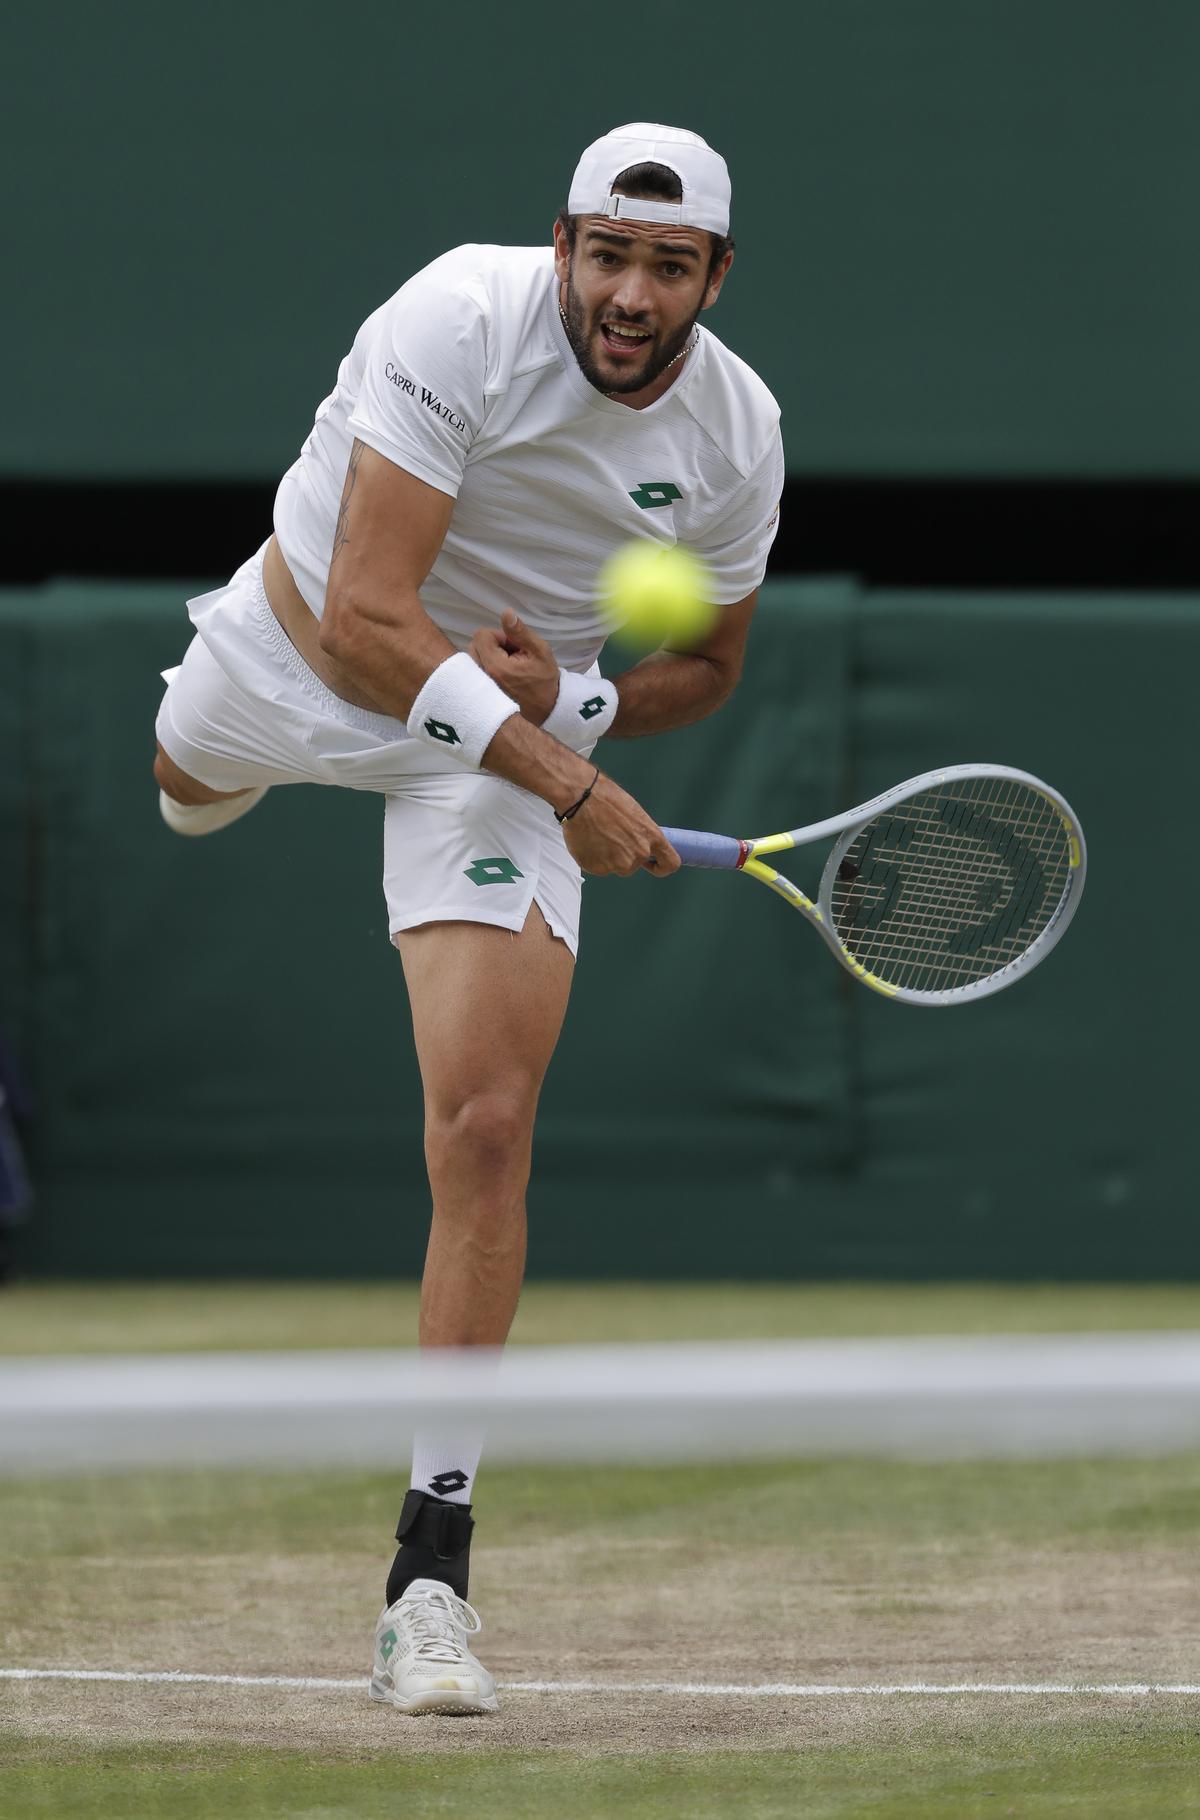 Setting the agenda: Most times, when Berrettini lands his first serve, it’s either unreturnable or draws an easy putaway. | Photo credit: Getty Images